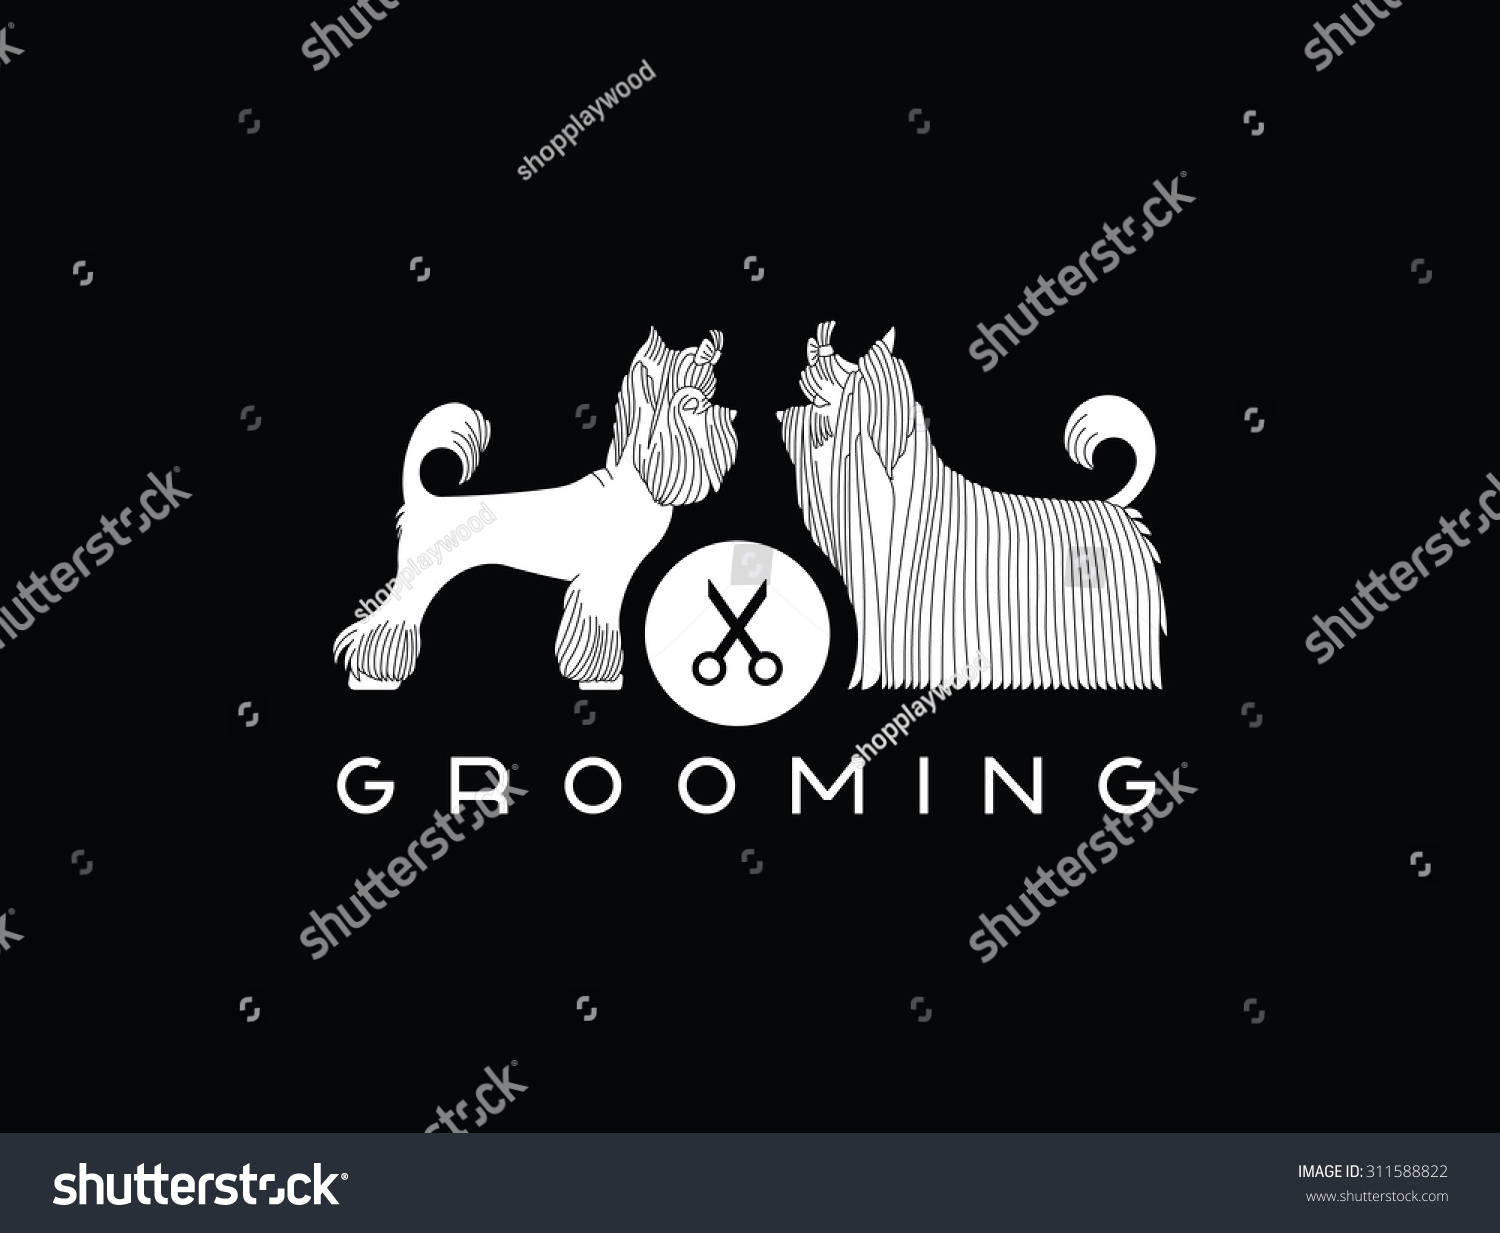 Logo Dog Beauty Grooming Salon. Illustration With Yorkshire Terriers ...